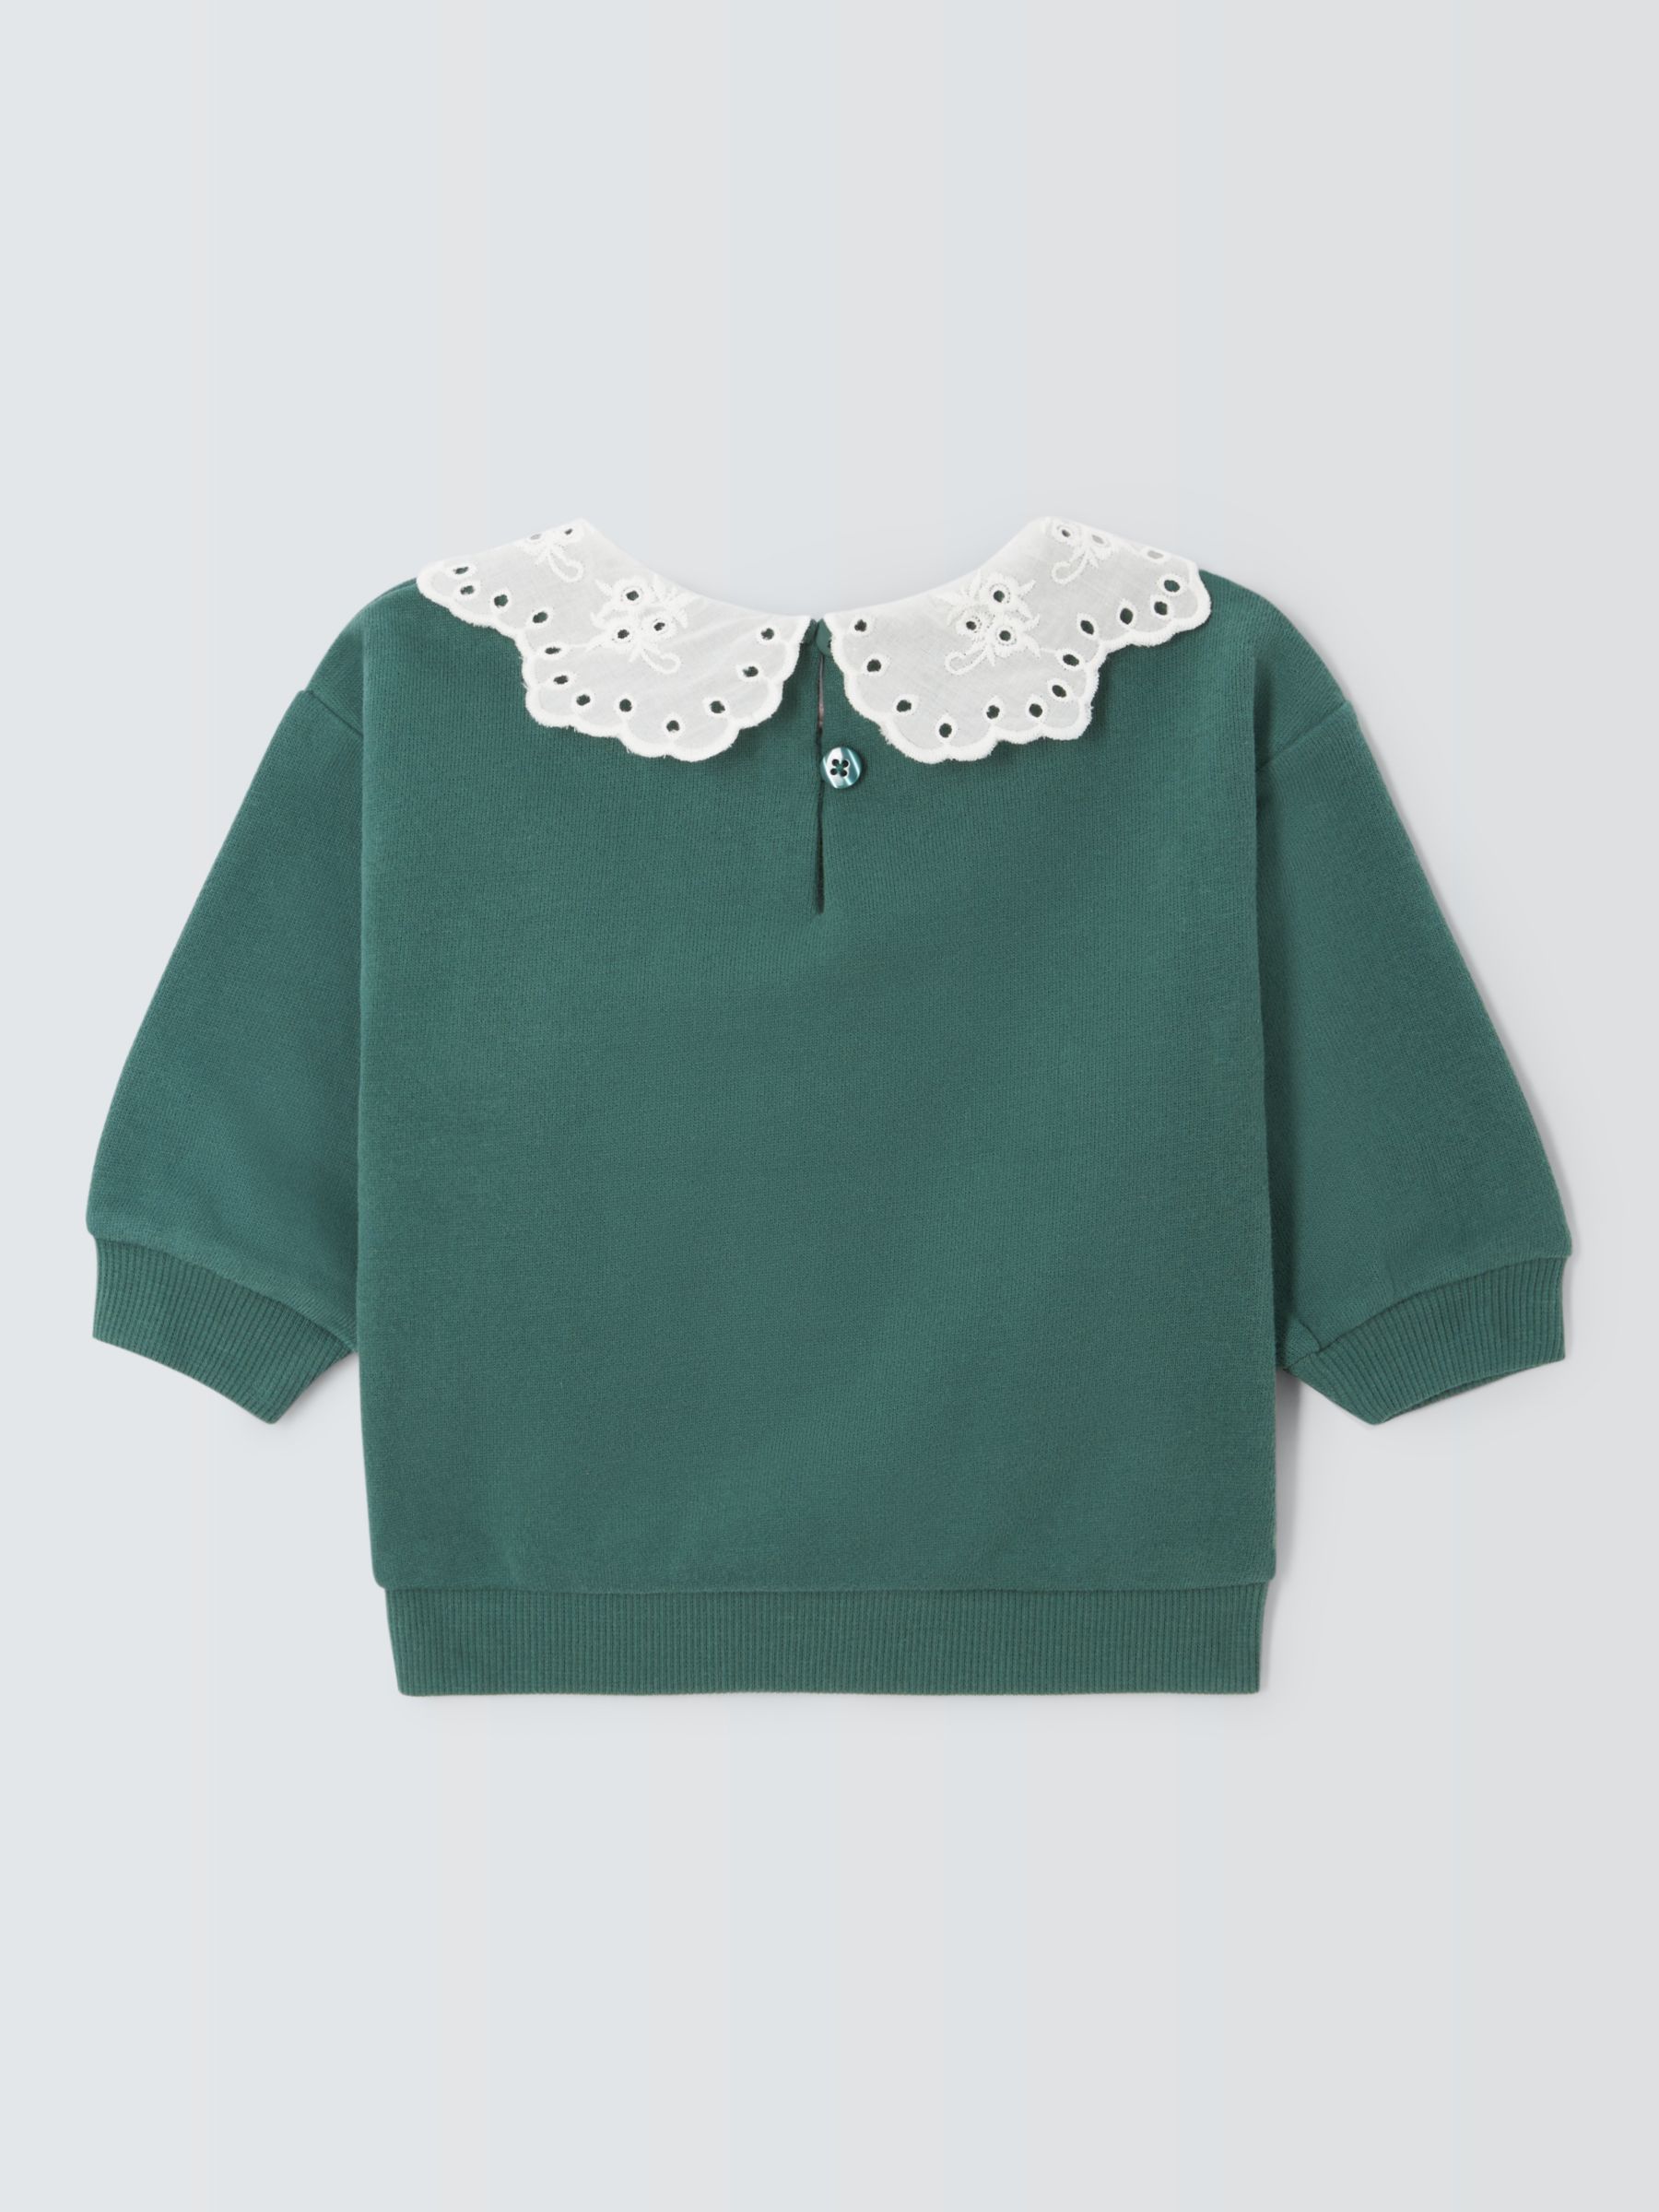 John Lewis Baby Floral Embroidered Lace Collar Sweatshirt, Green/Multi, 6-9 months